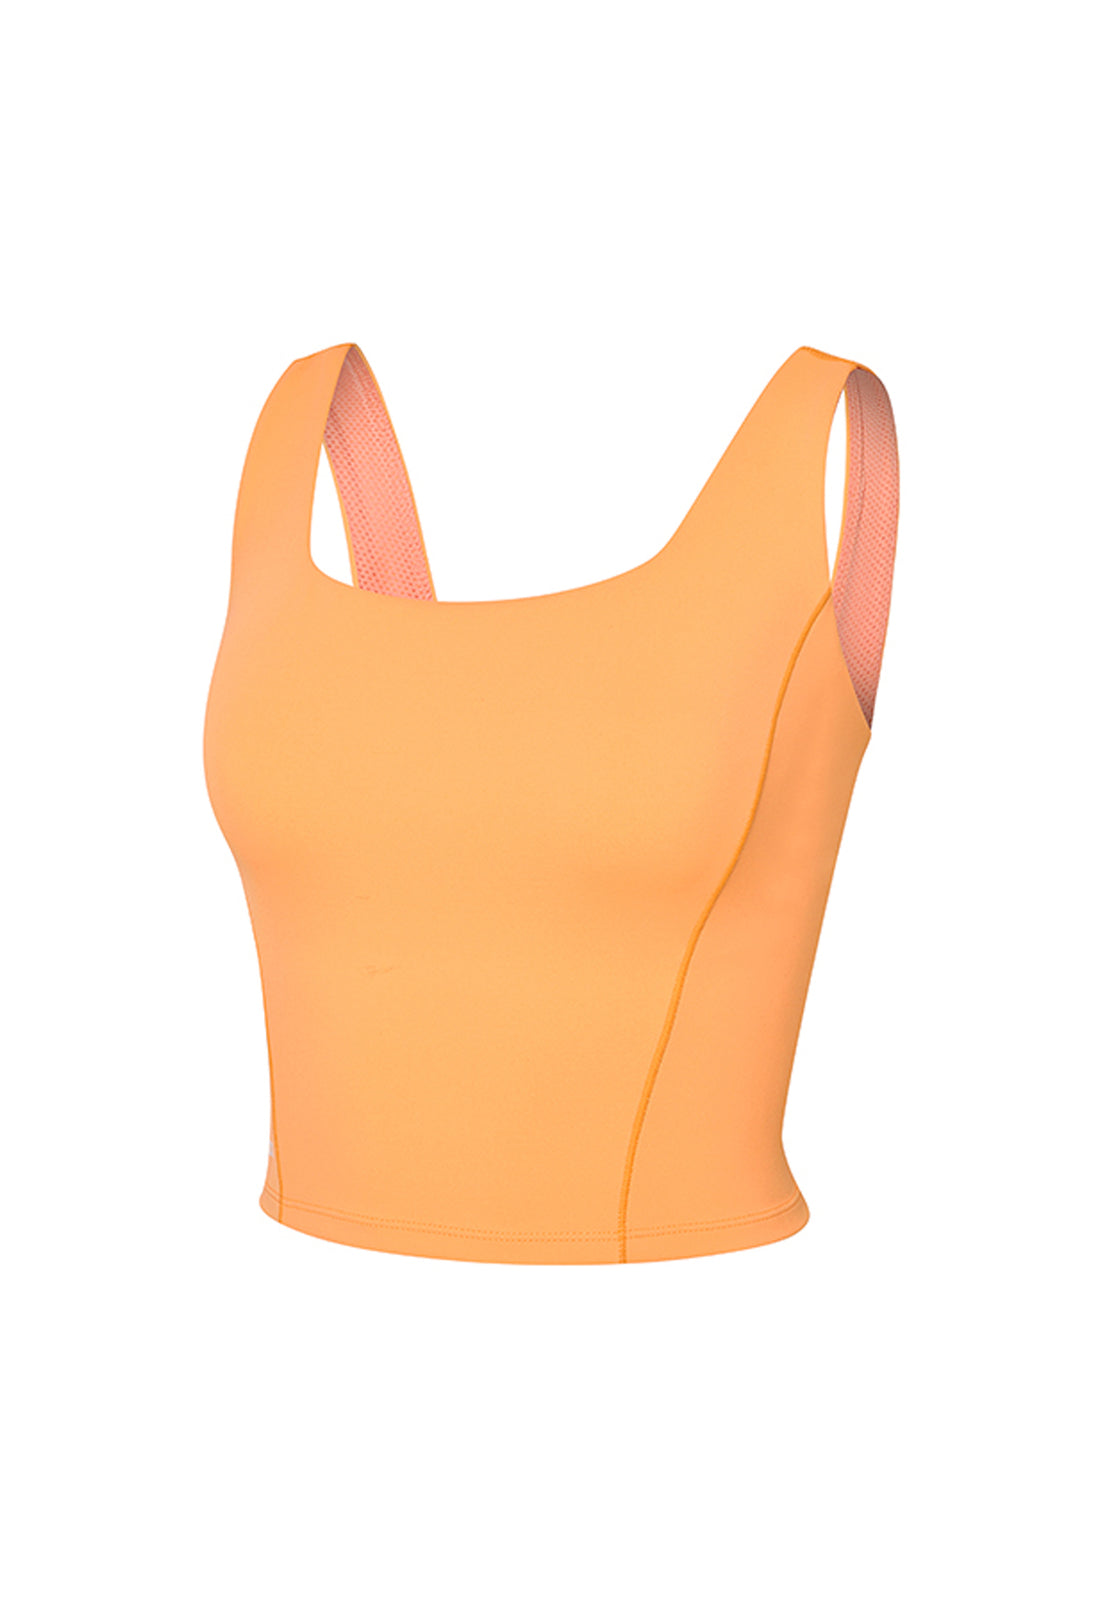 XEXYMIX Black Label Signature 380N Support Top - Orange Muse